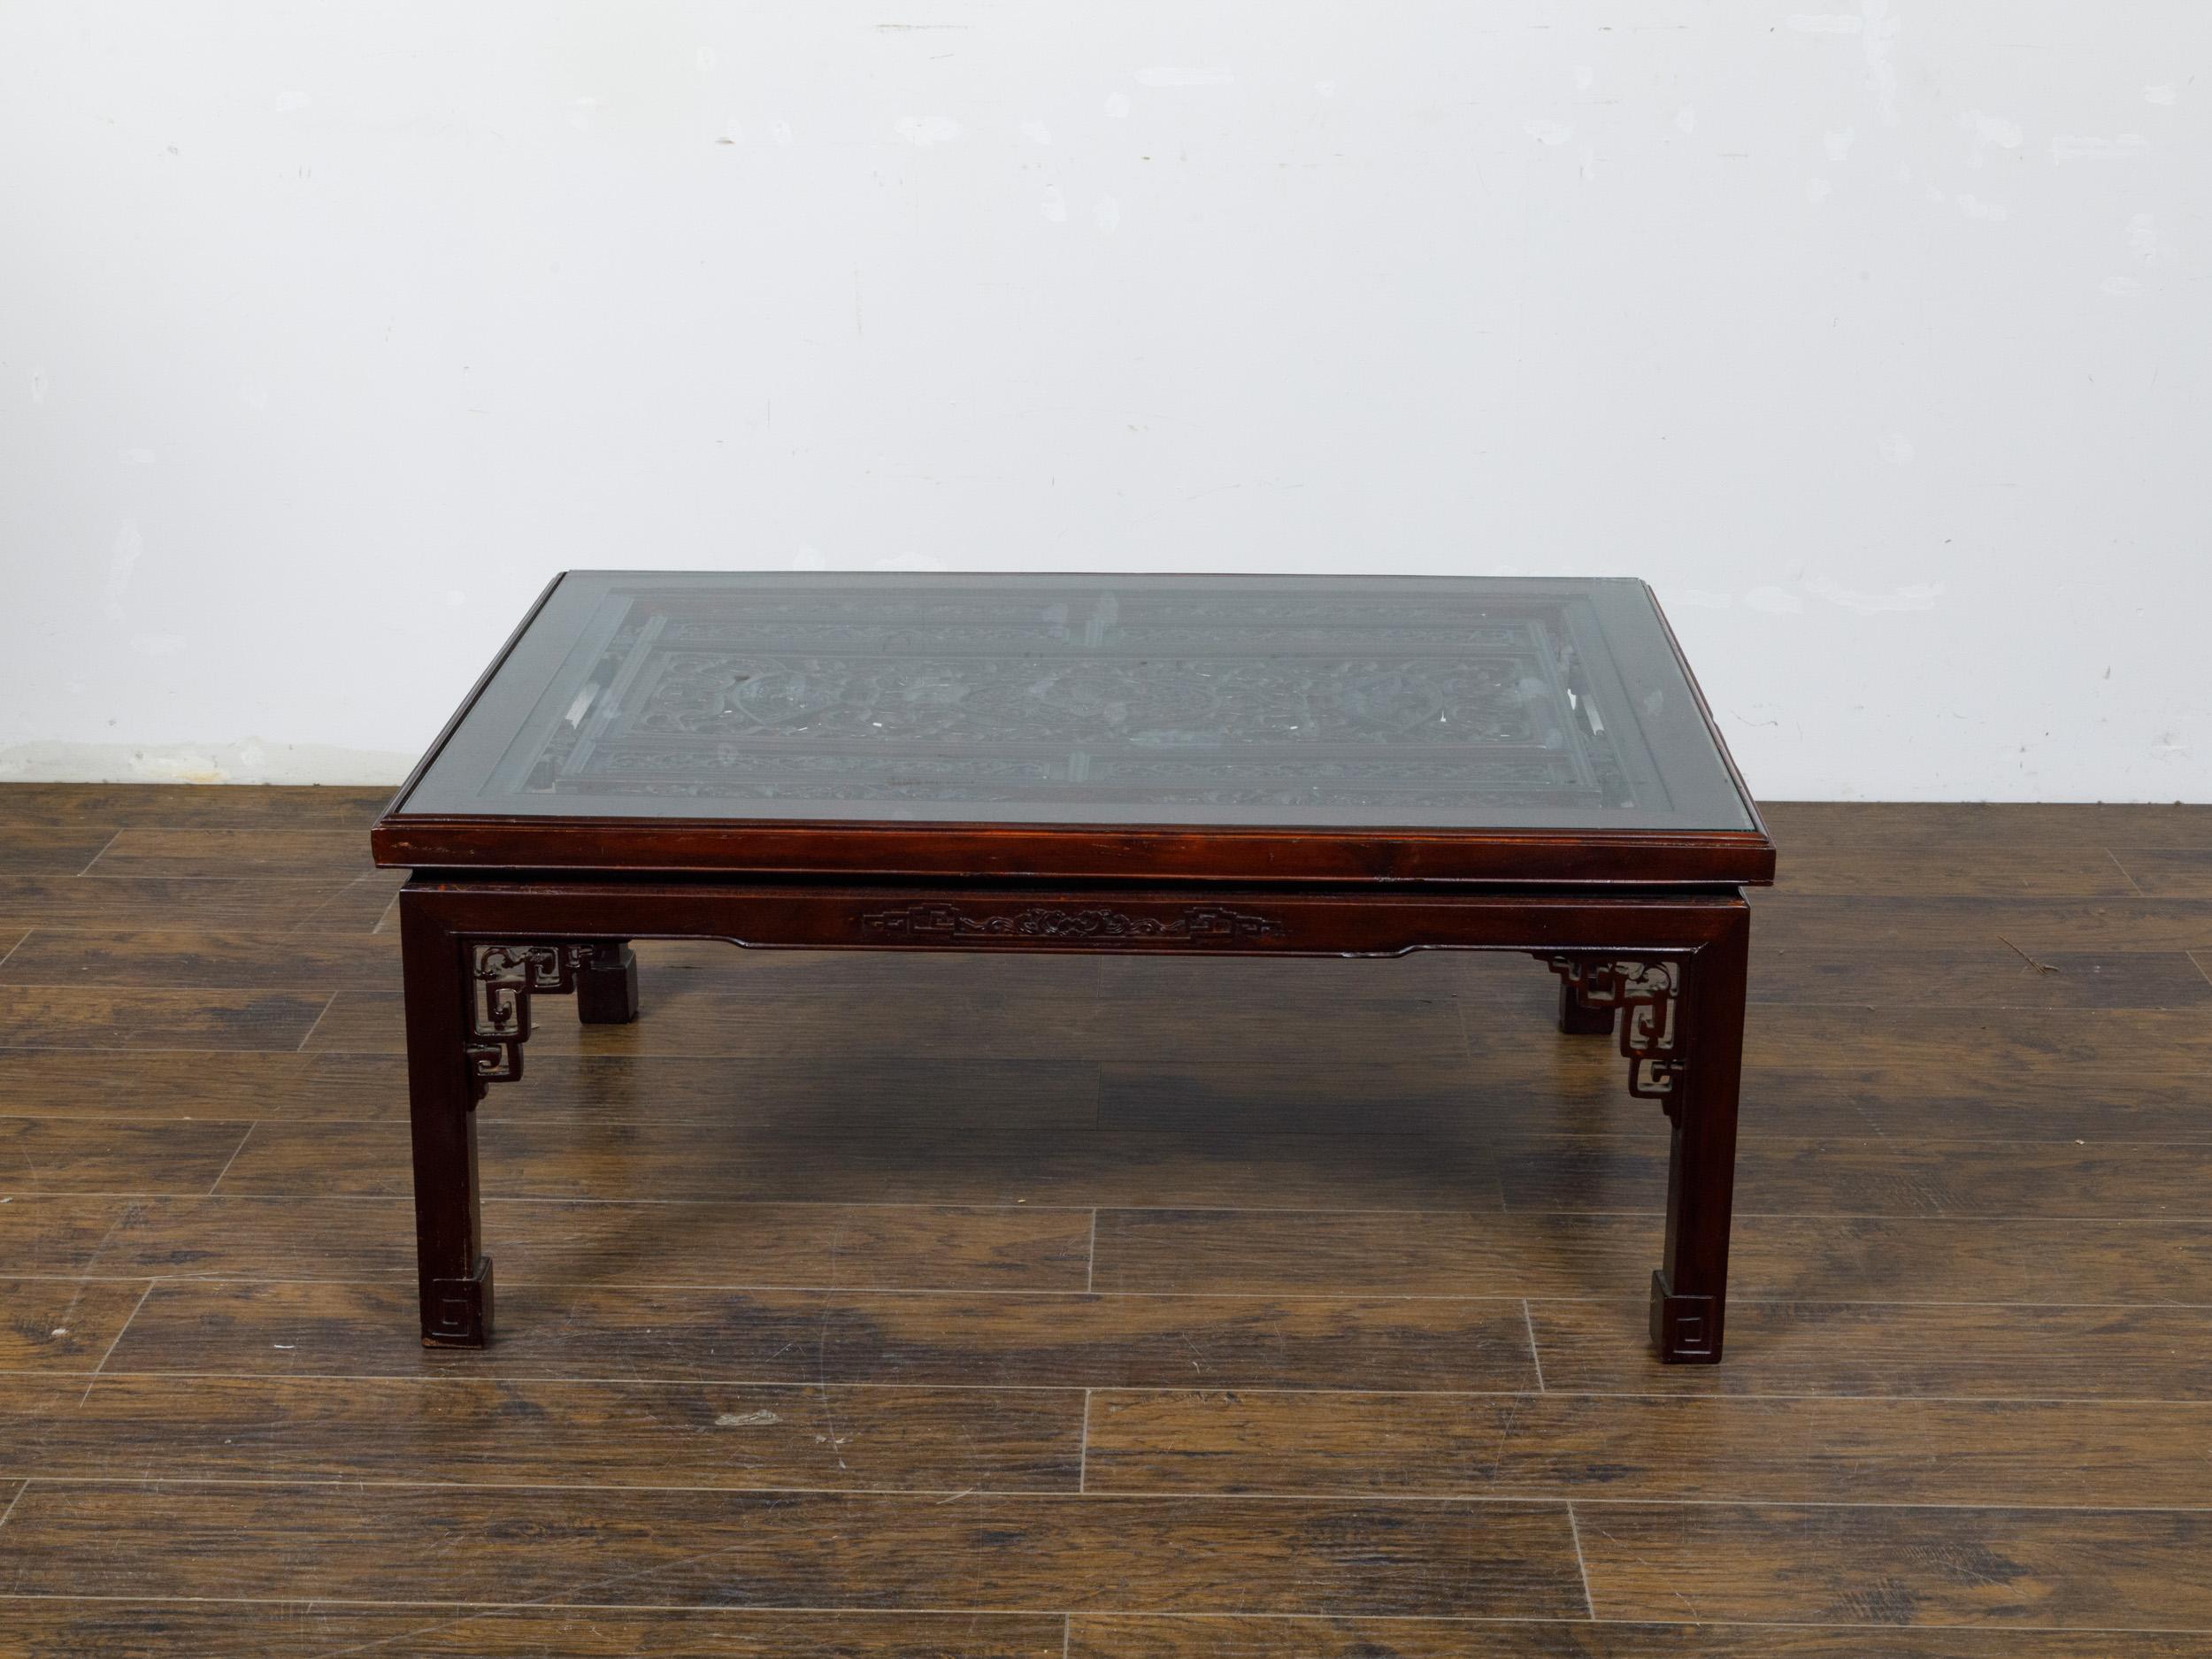 Glass Top Coffee Table with Fretwork Motifs and Scrolling Feet, circa 1950 For Sale 8